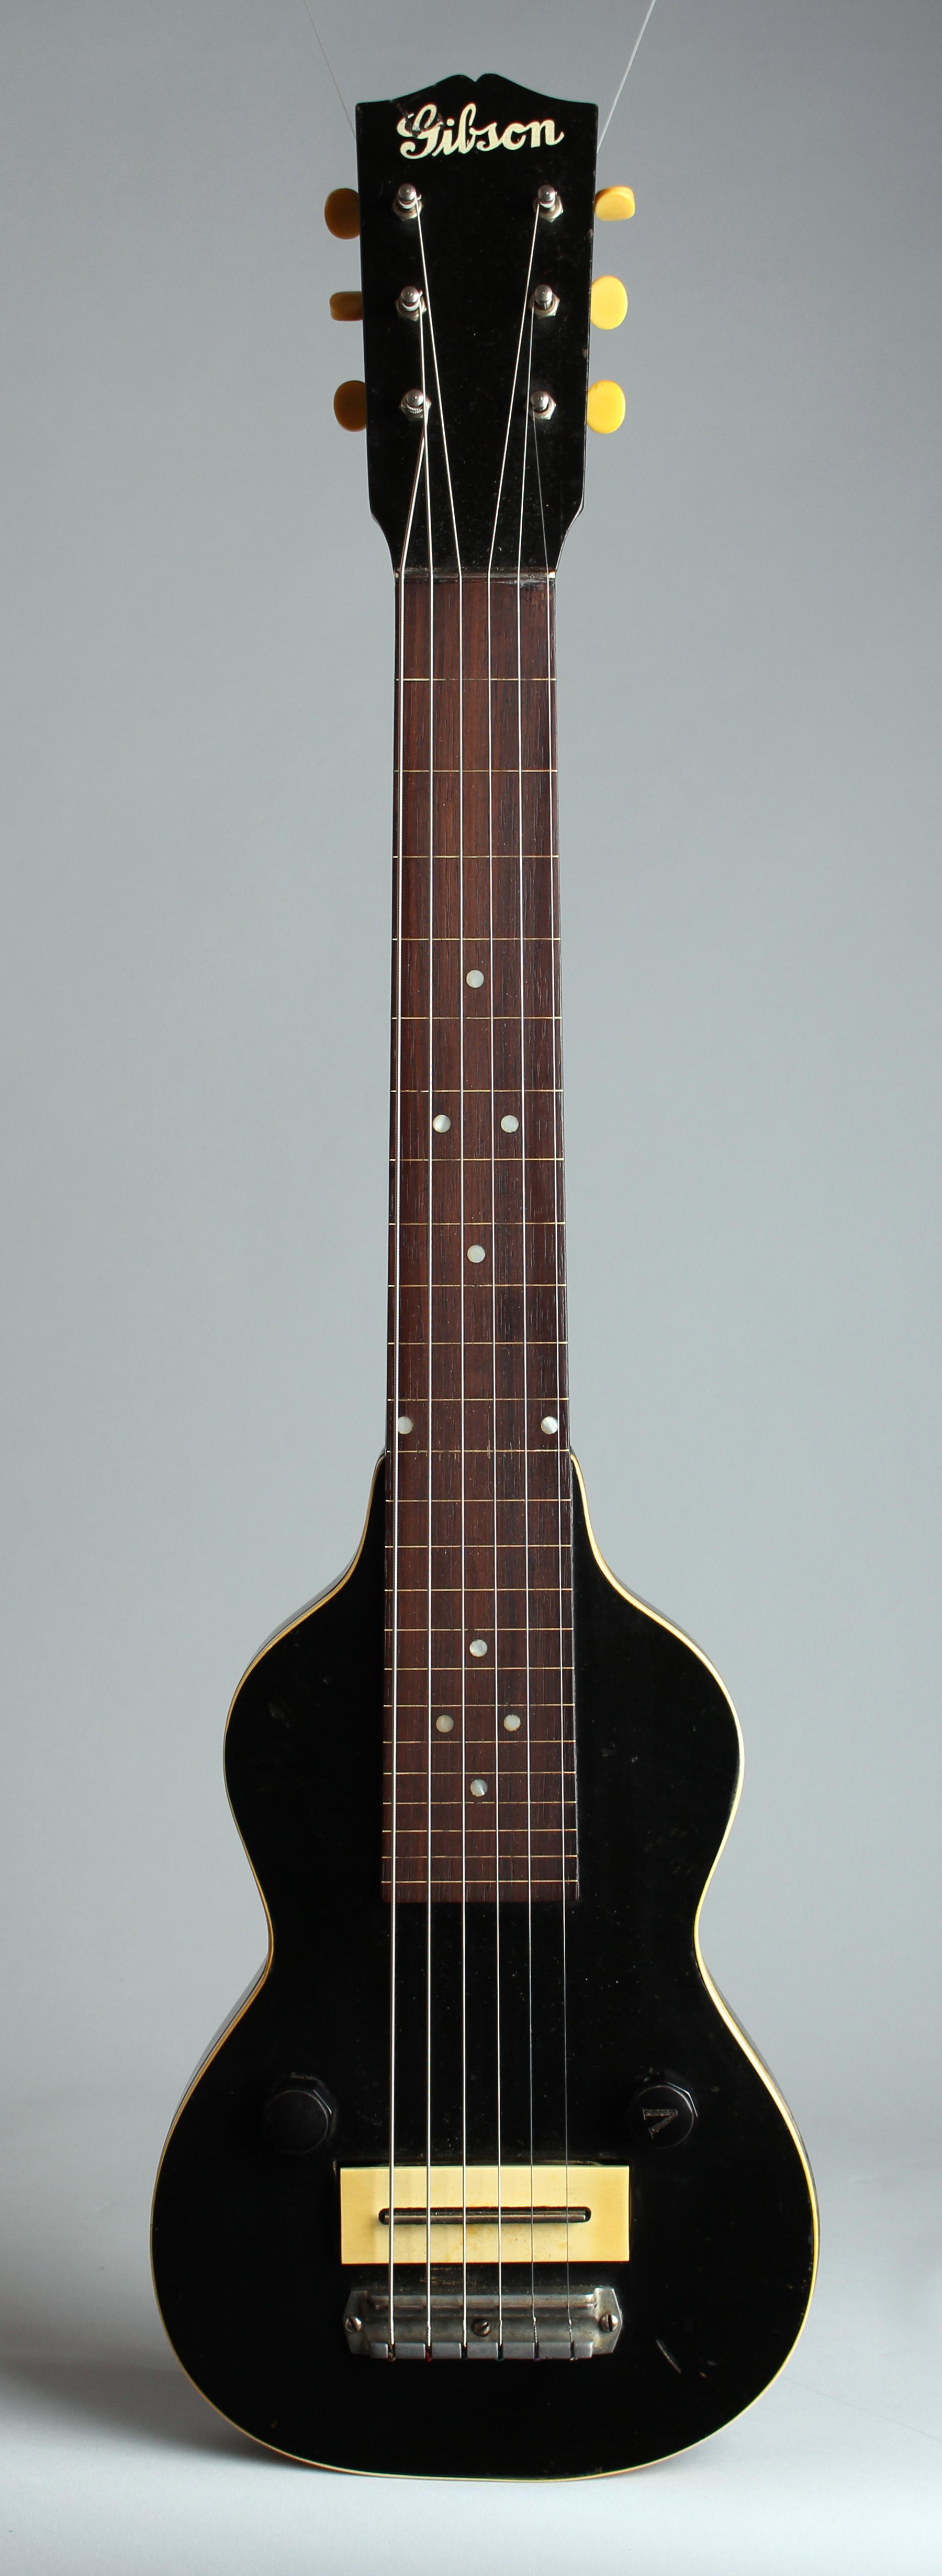 Gibson  EH-100 Lap Steel Electric Guitar  (1937)